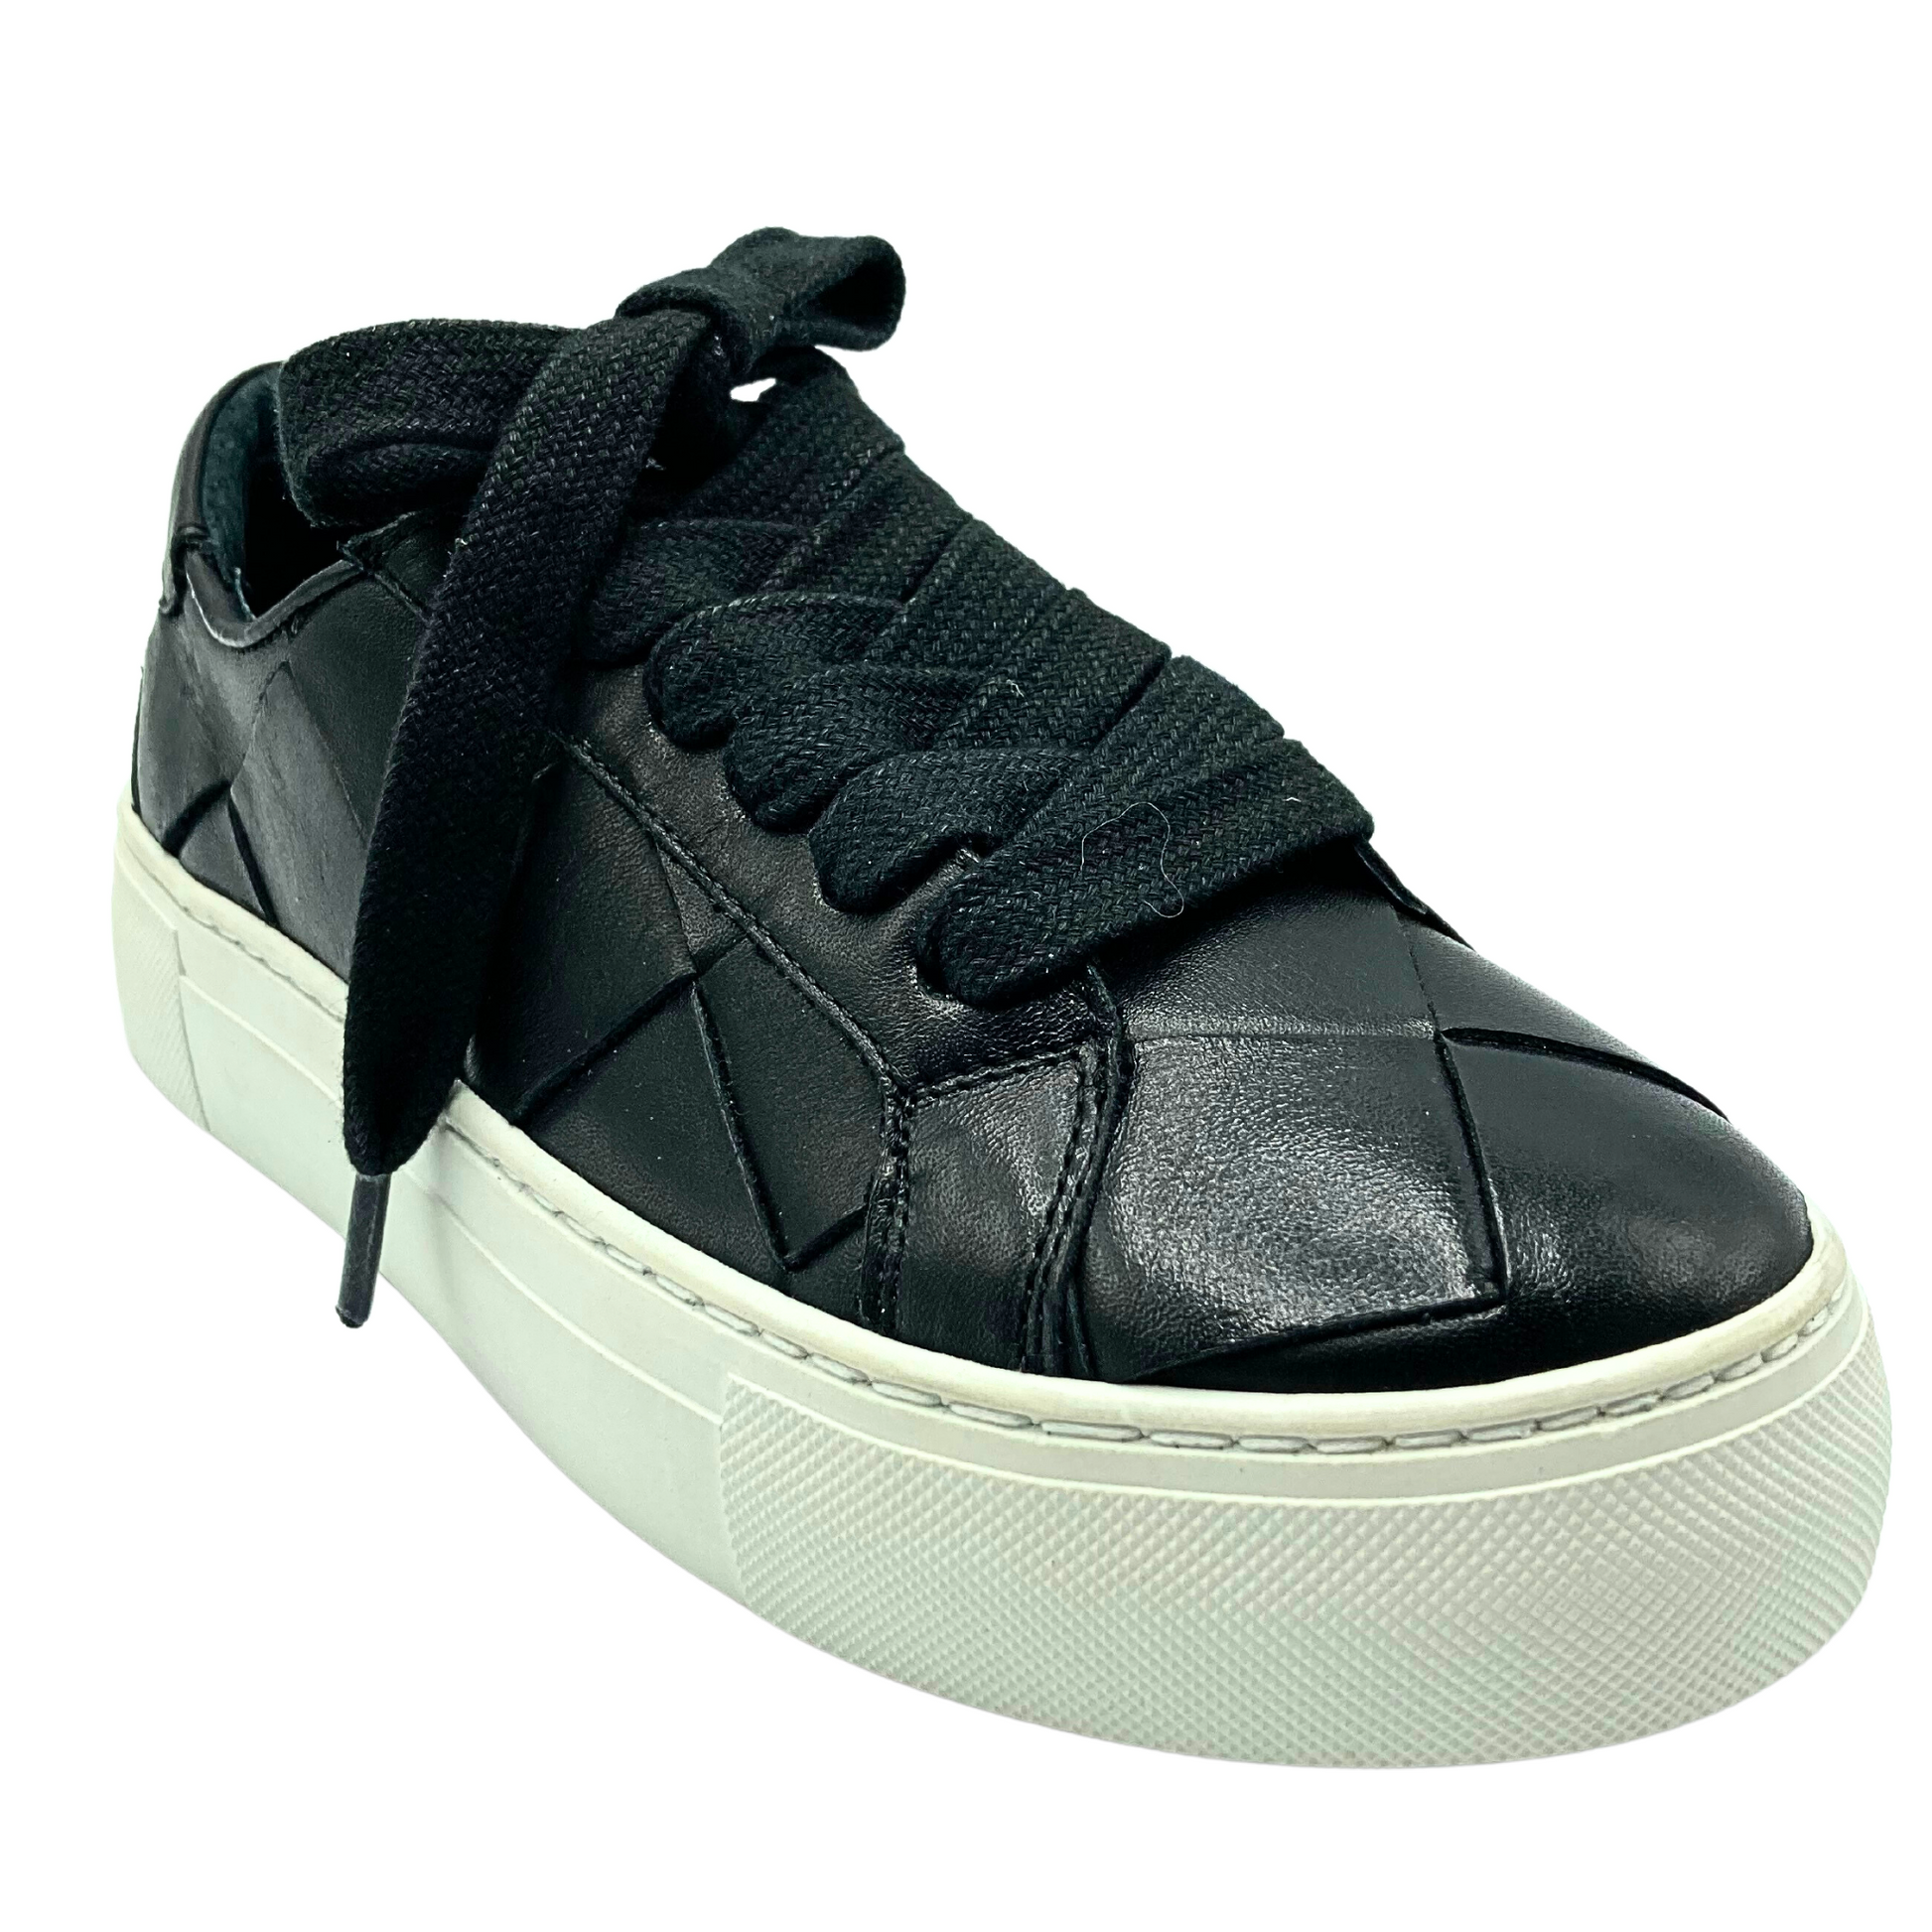 Angled front view of a fashion sneaker with a woven leather